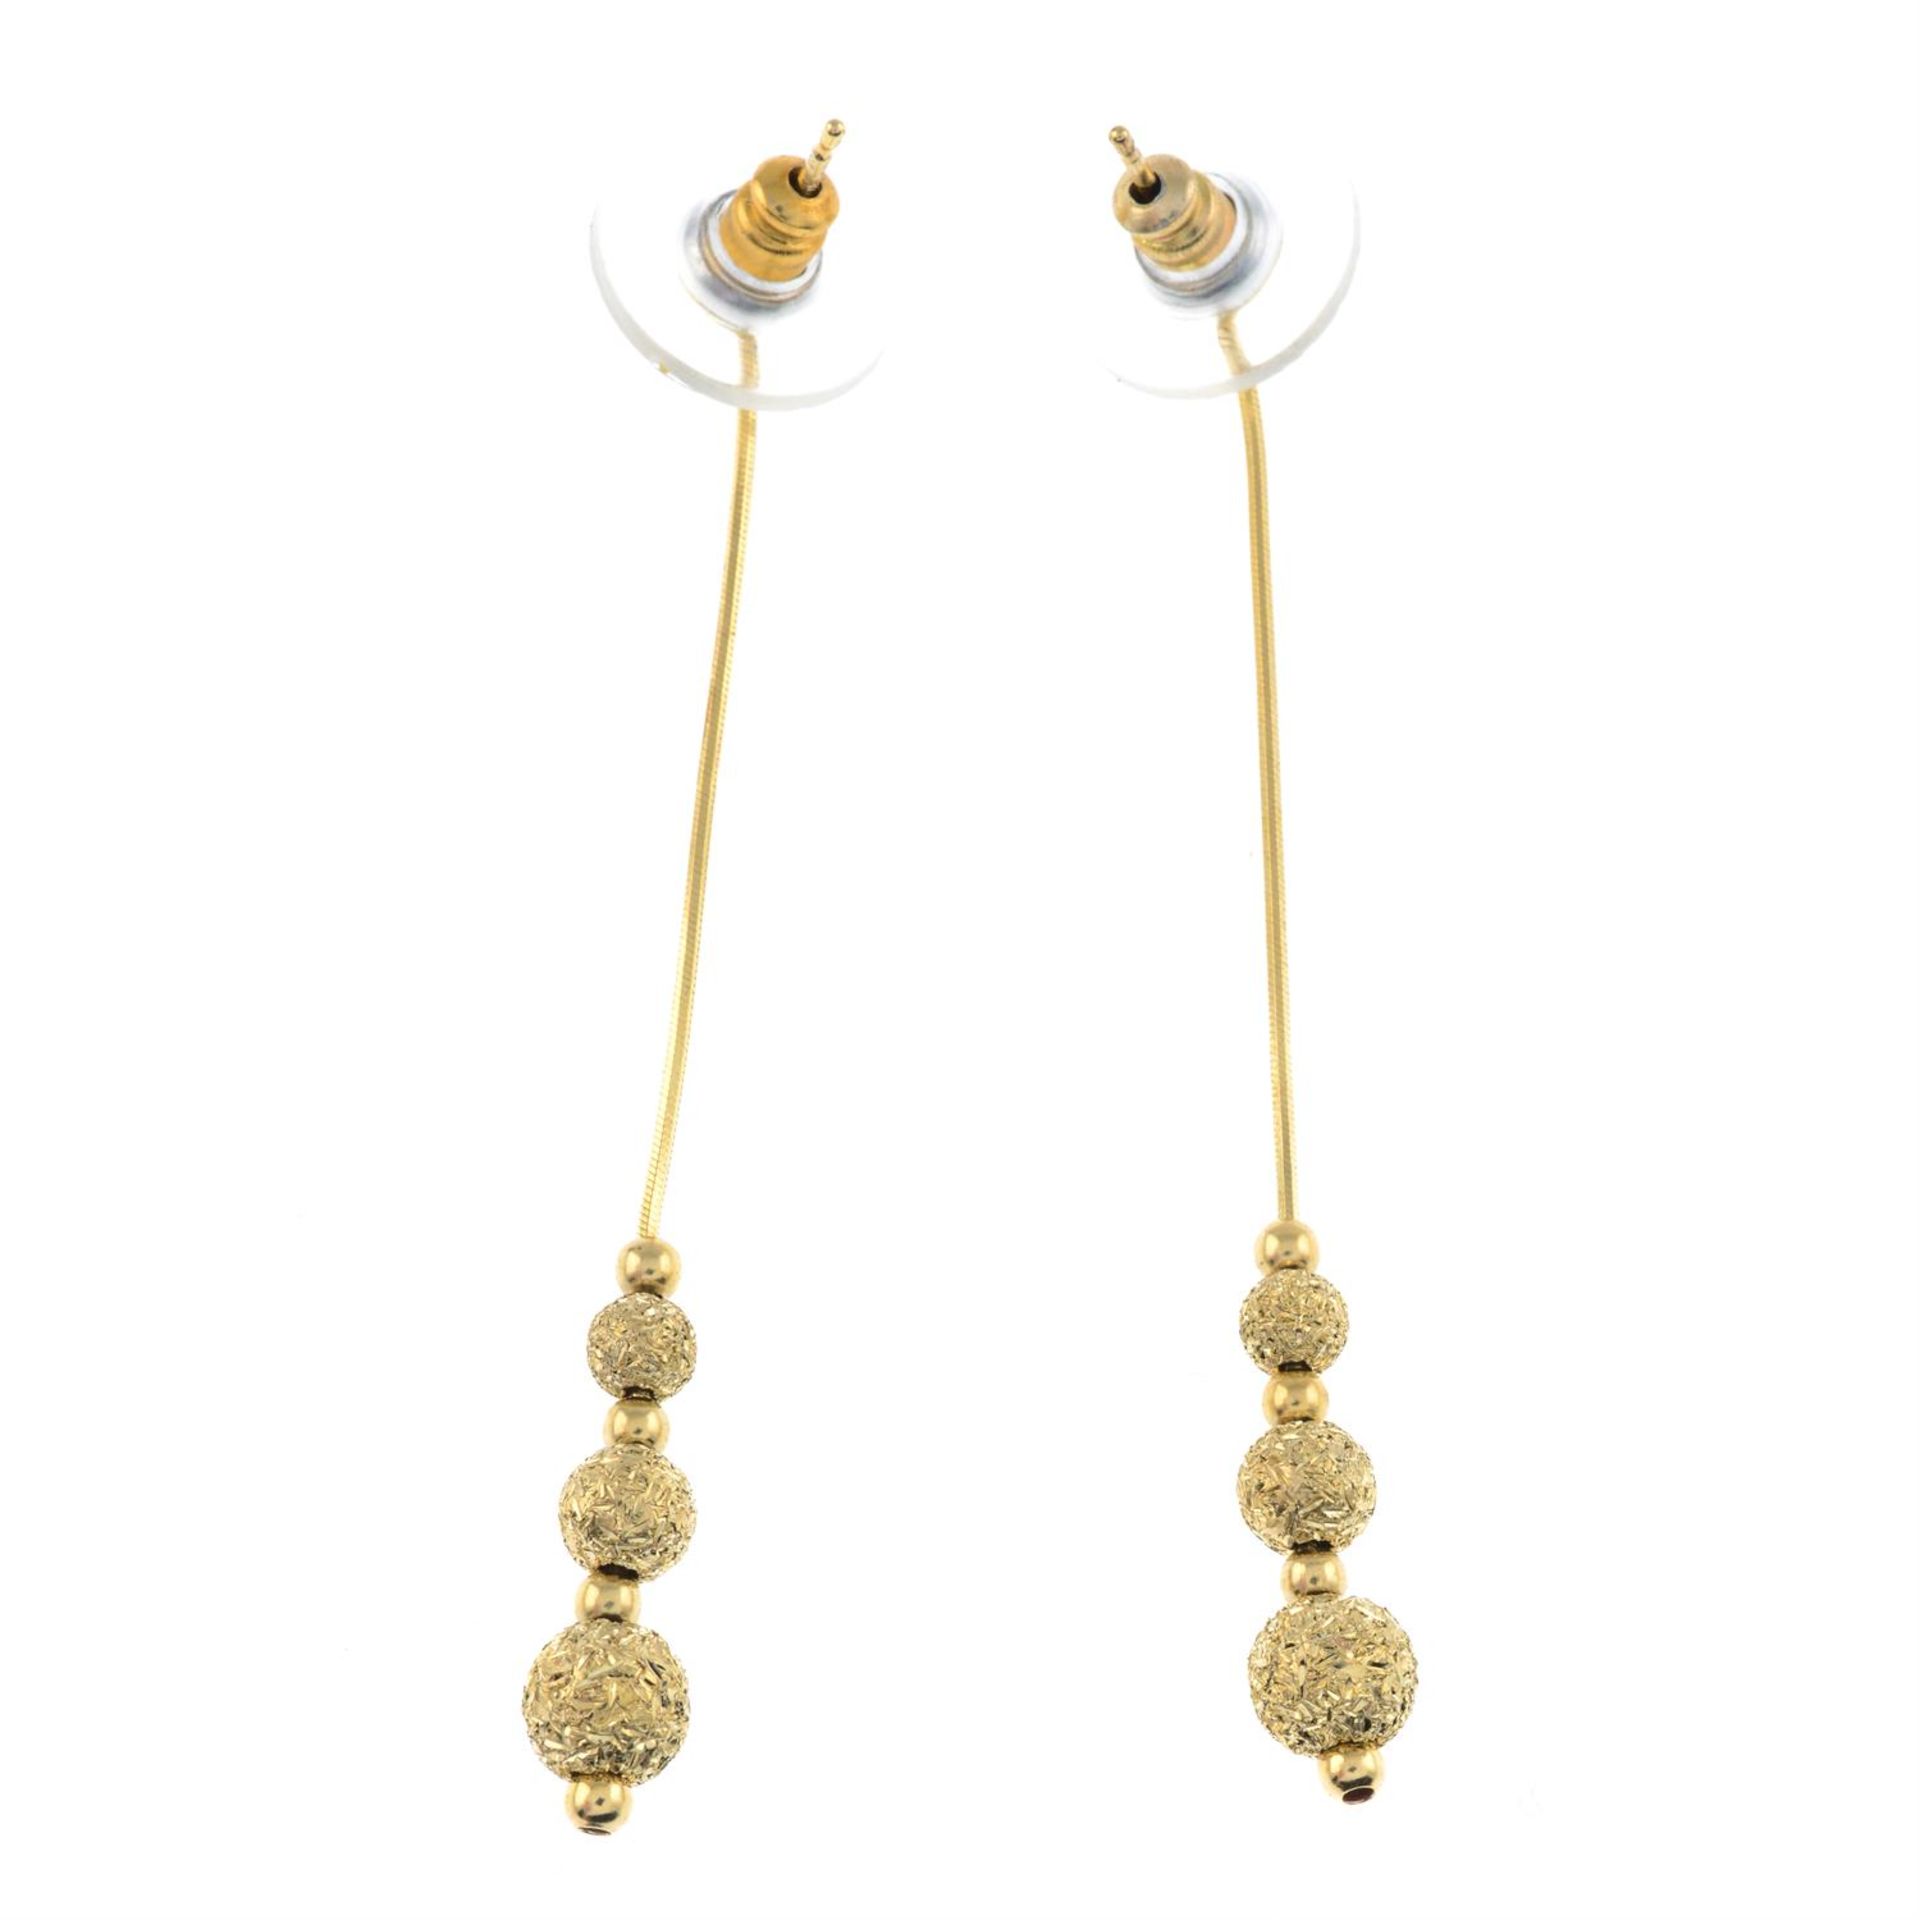 9ct gold drop earrings - Image 2 of 2